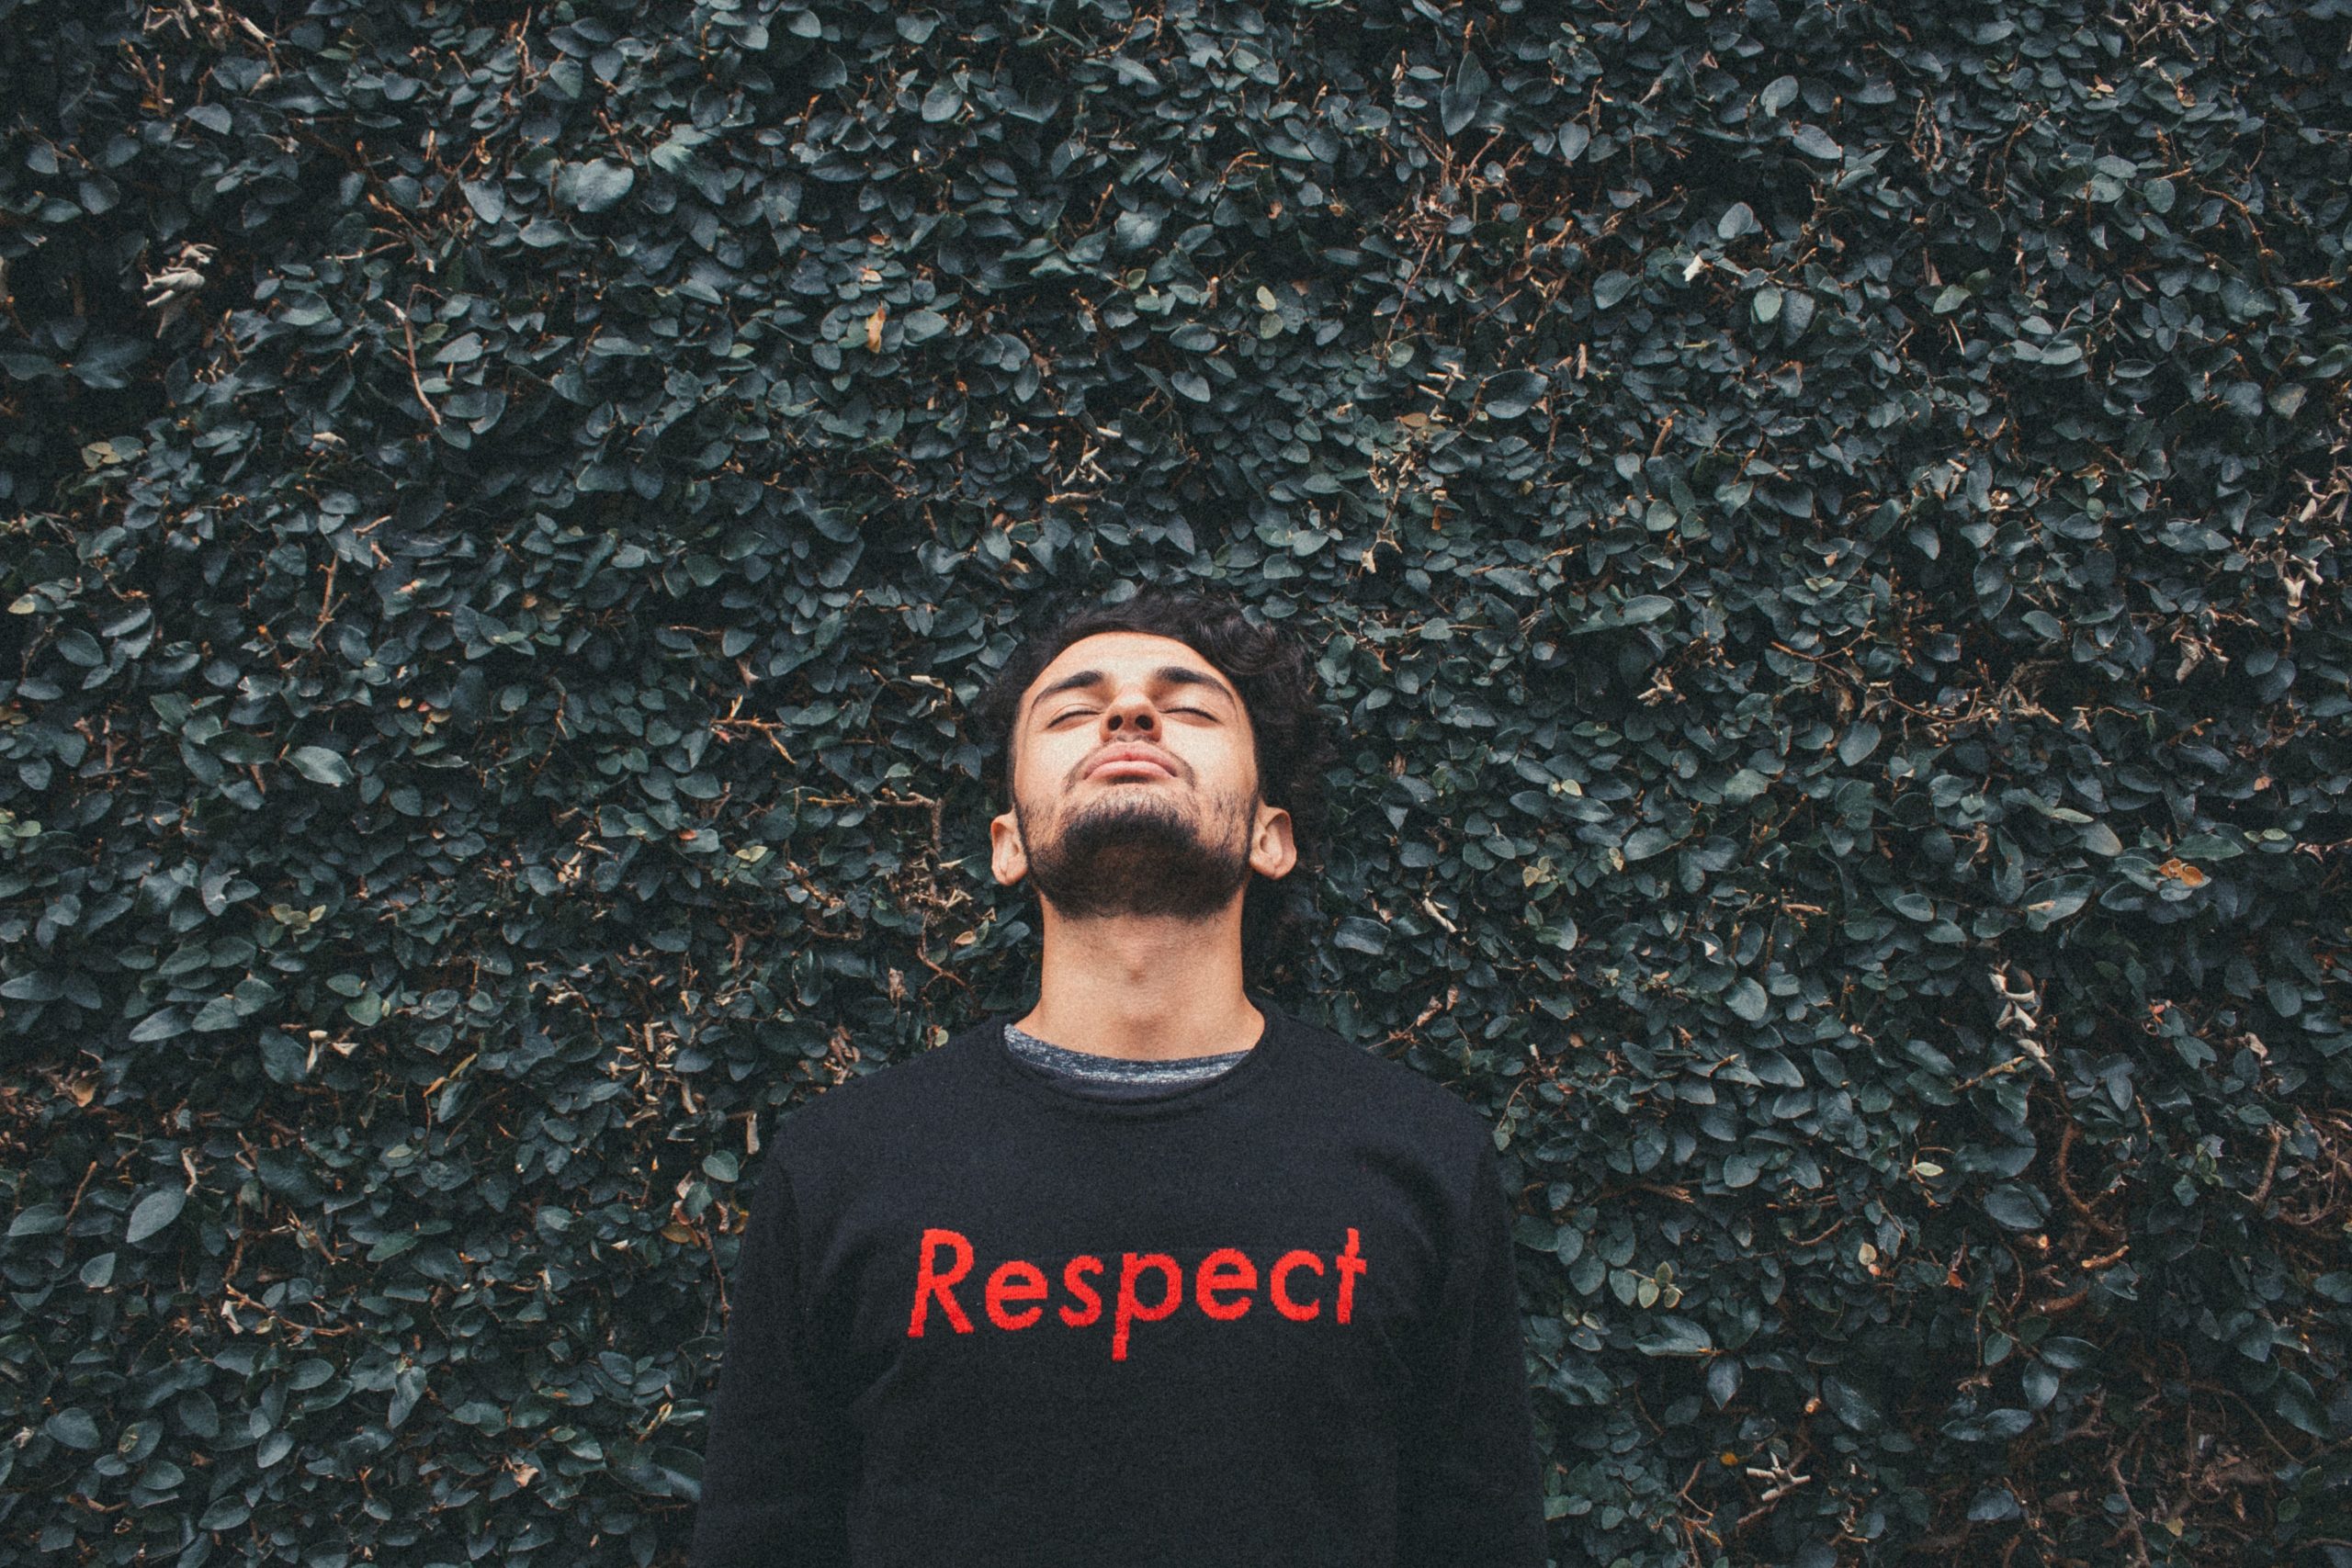 Want to be respected? Incorporate these 5 highly respectable qualities